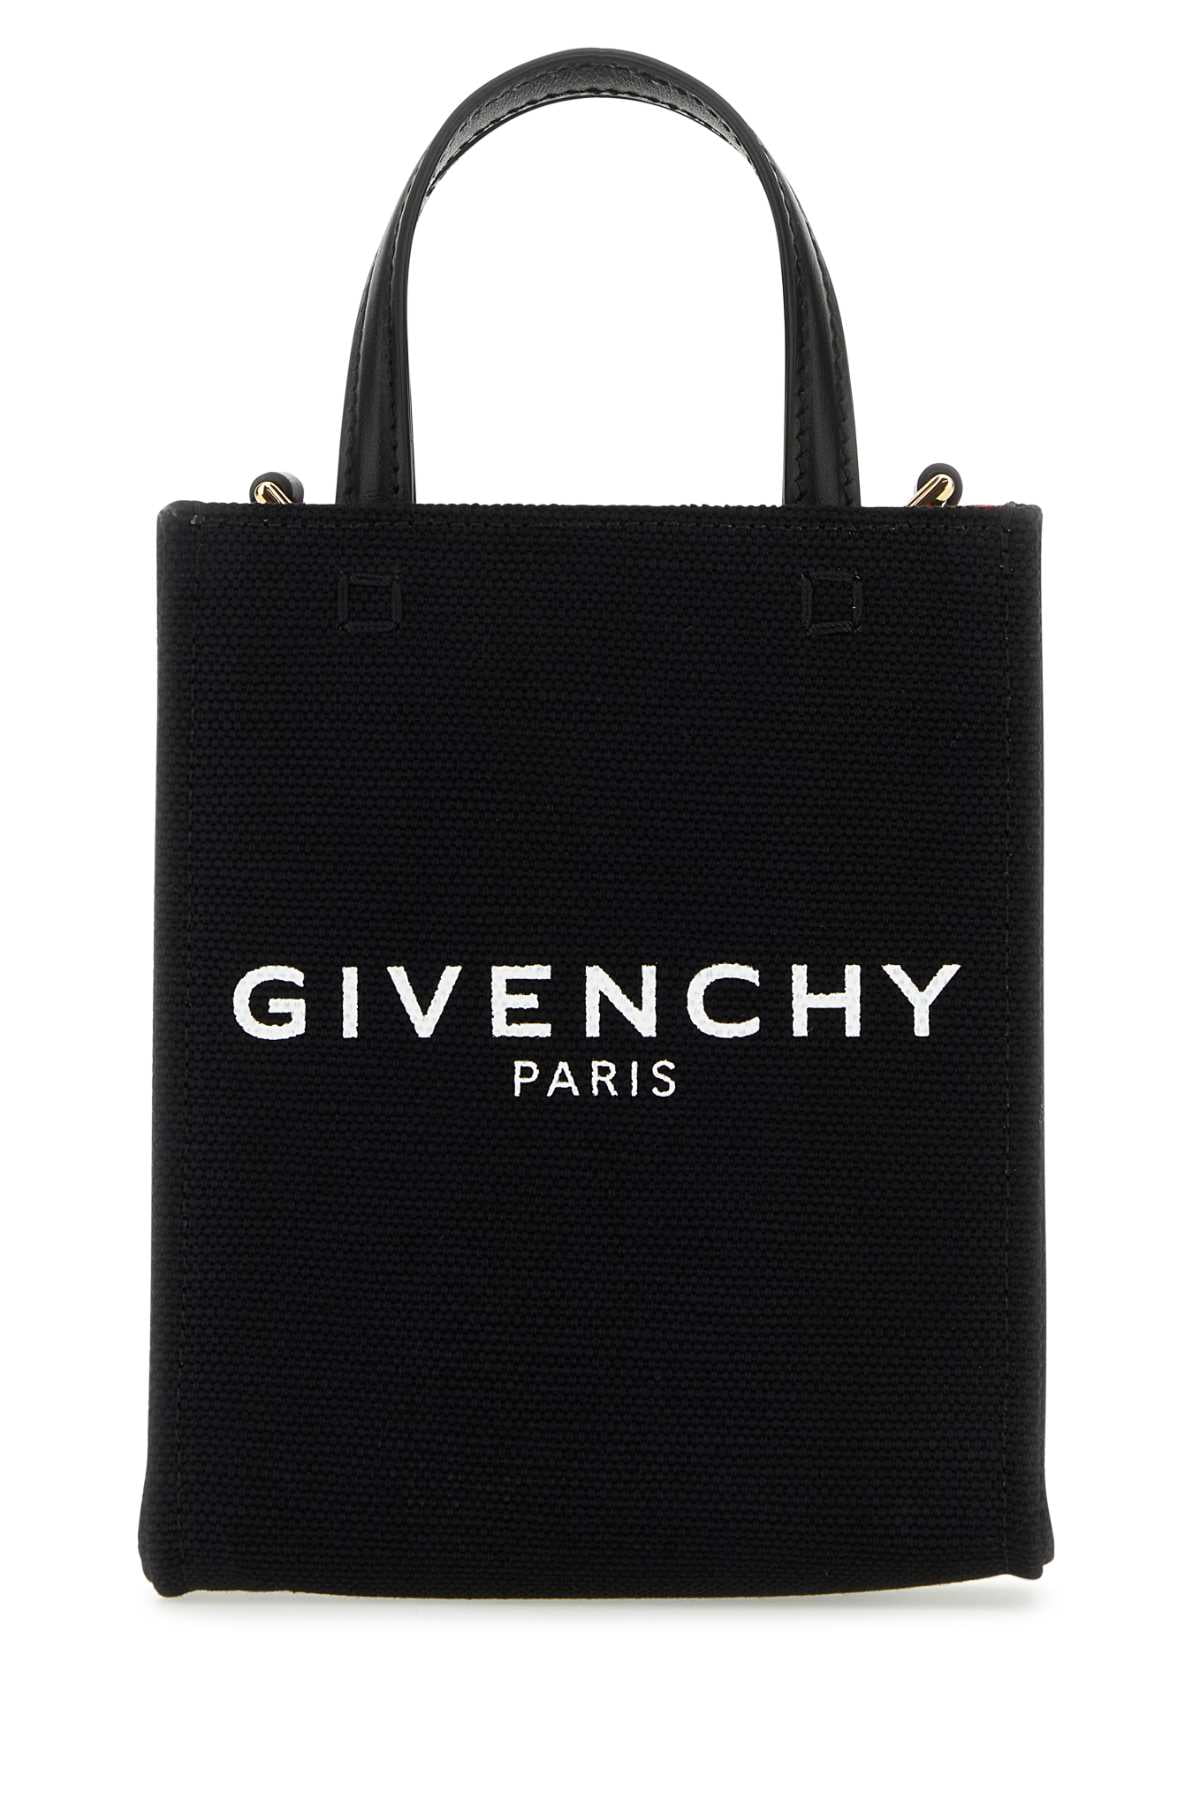 Givenchy Men's Bags | Stylicy India